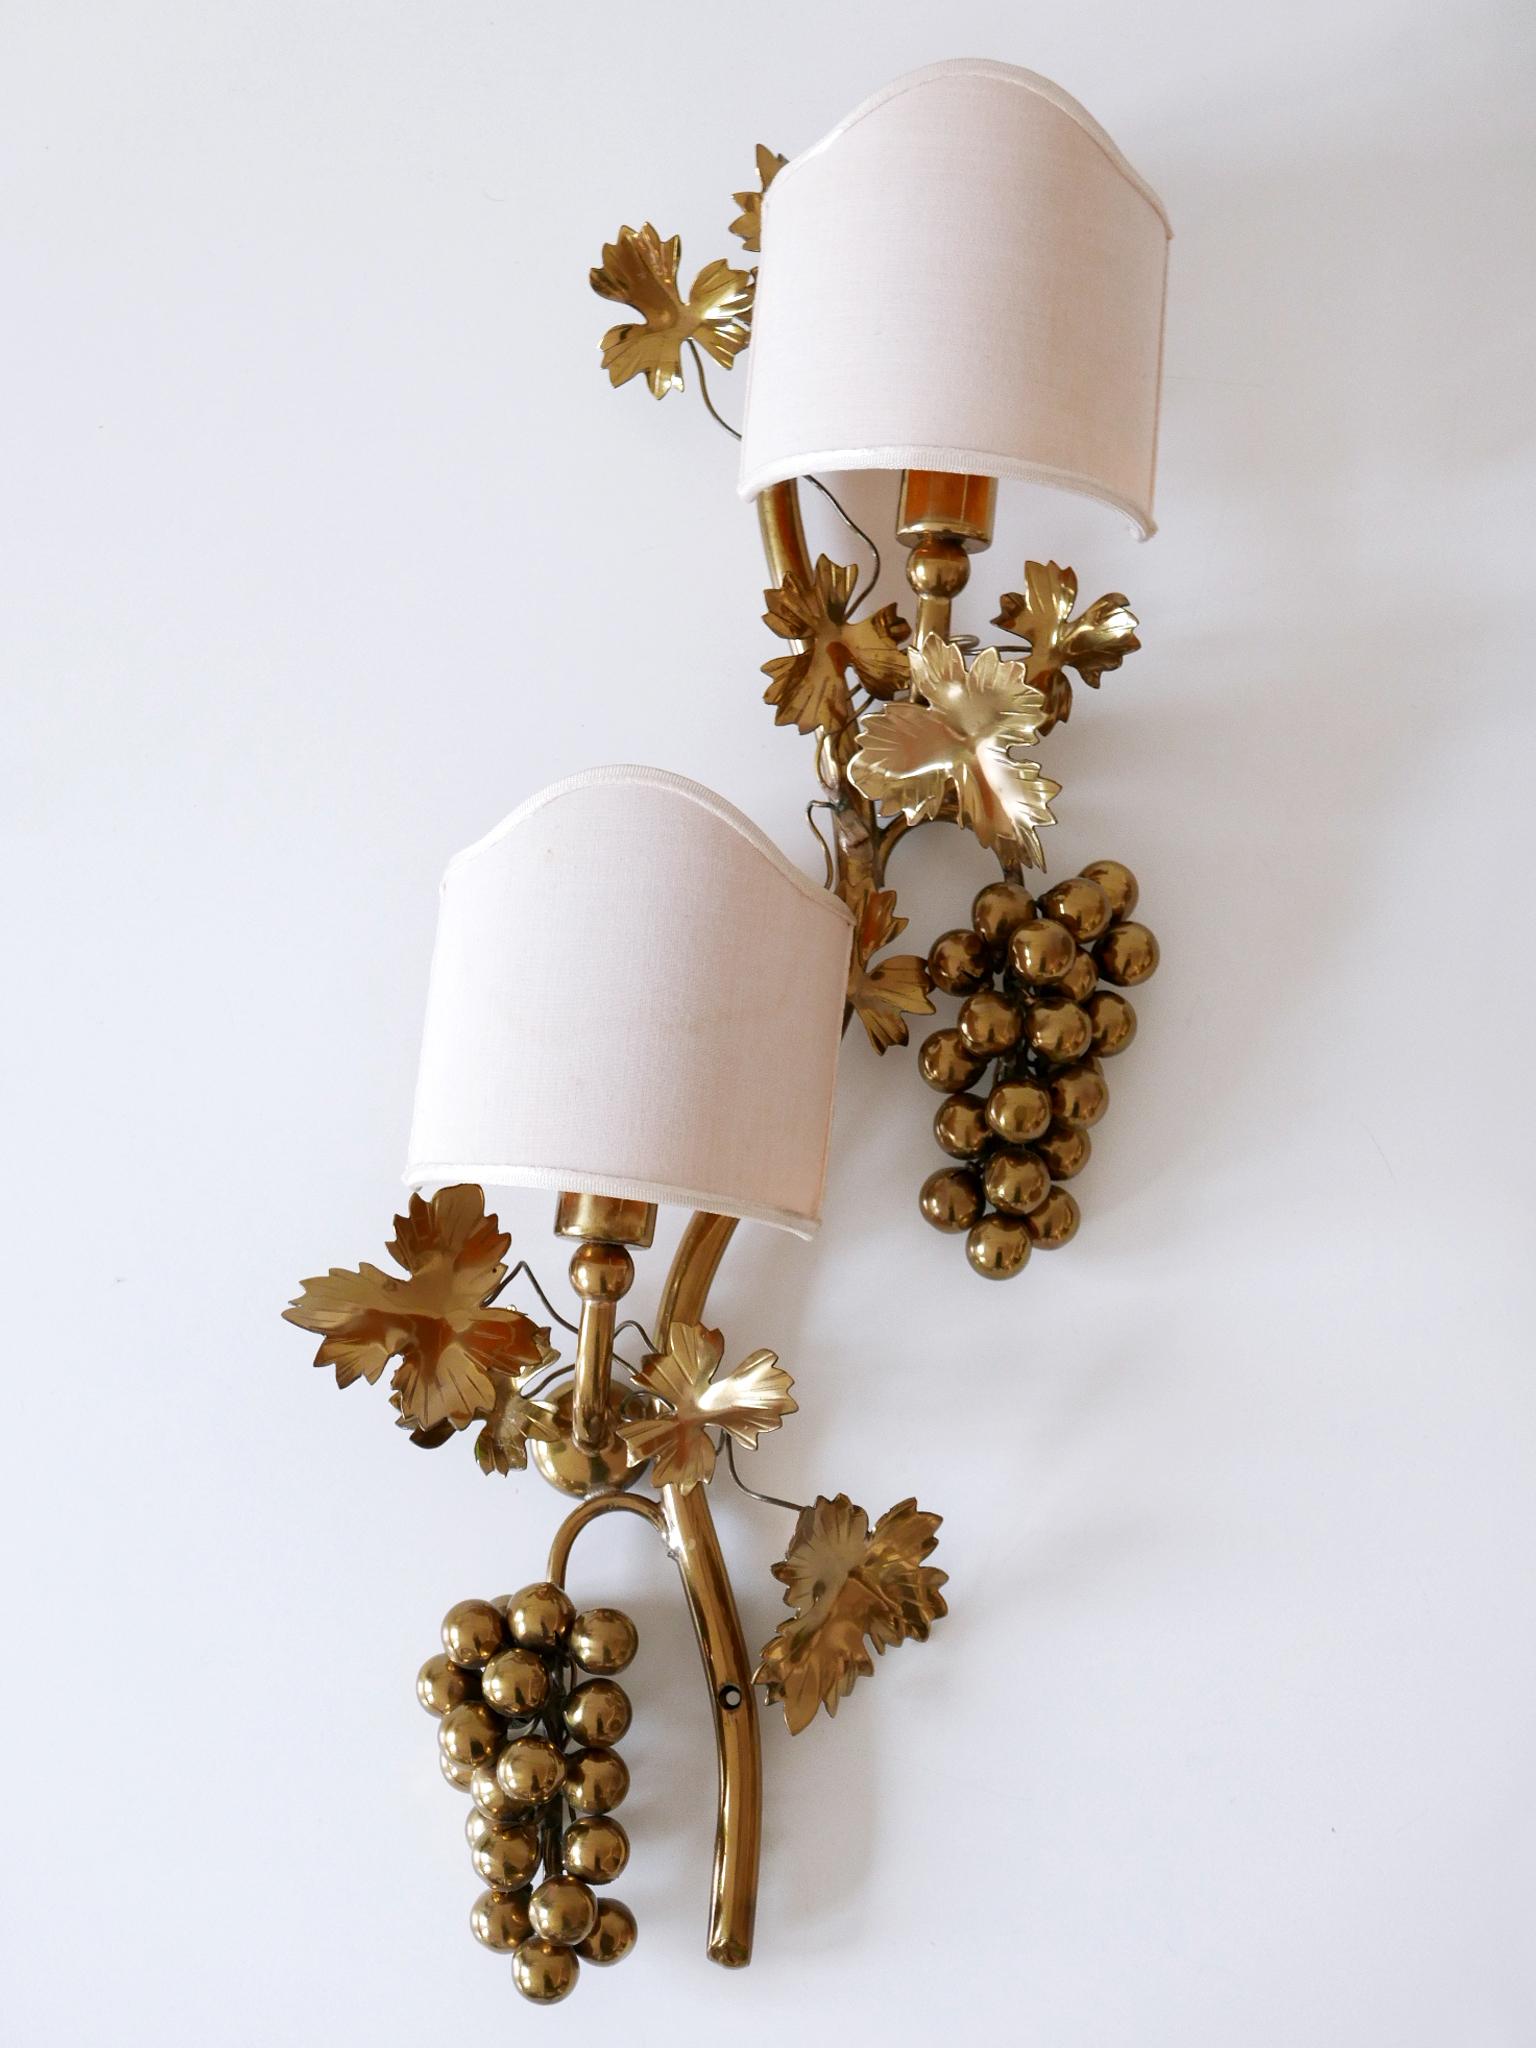 Set of Two Mid-Century Brass Grape Vine Leaves Sconces or Wall Lamps 1970s For Sale 8